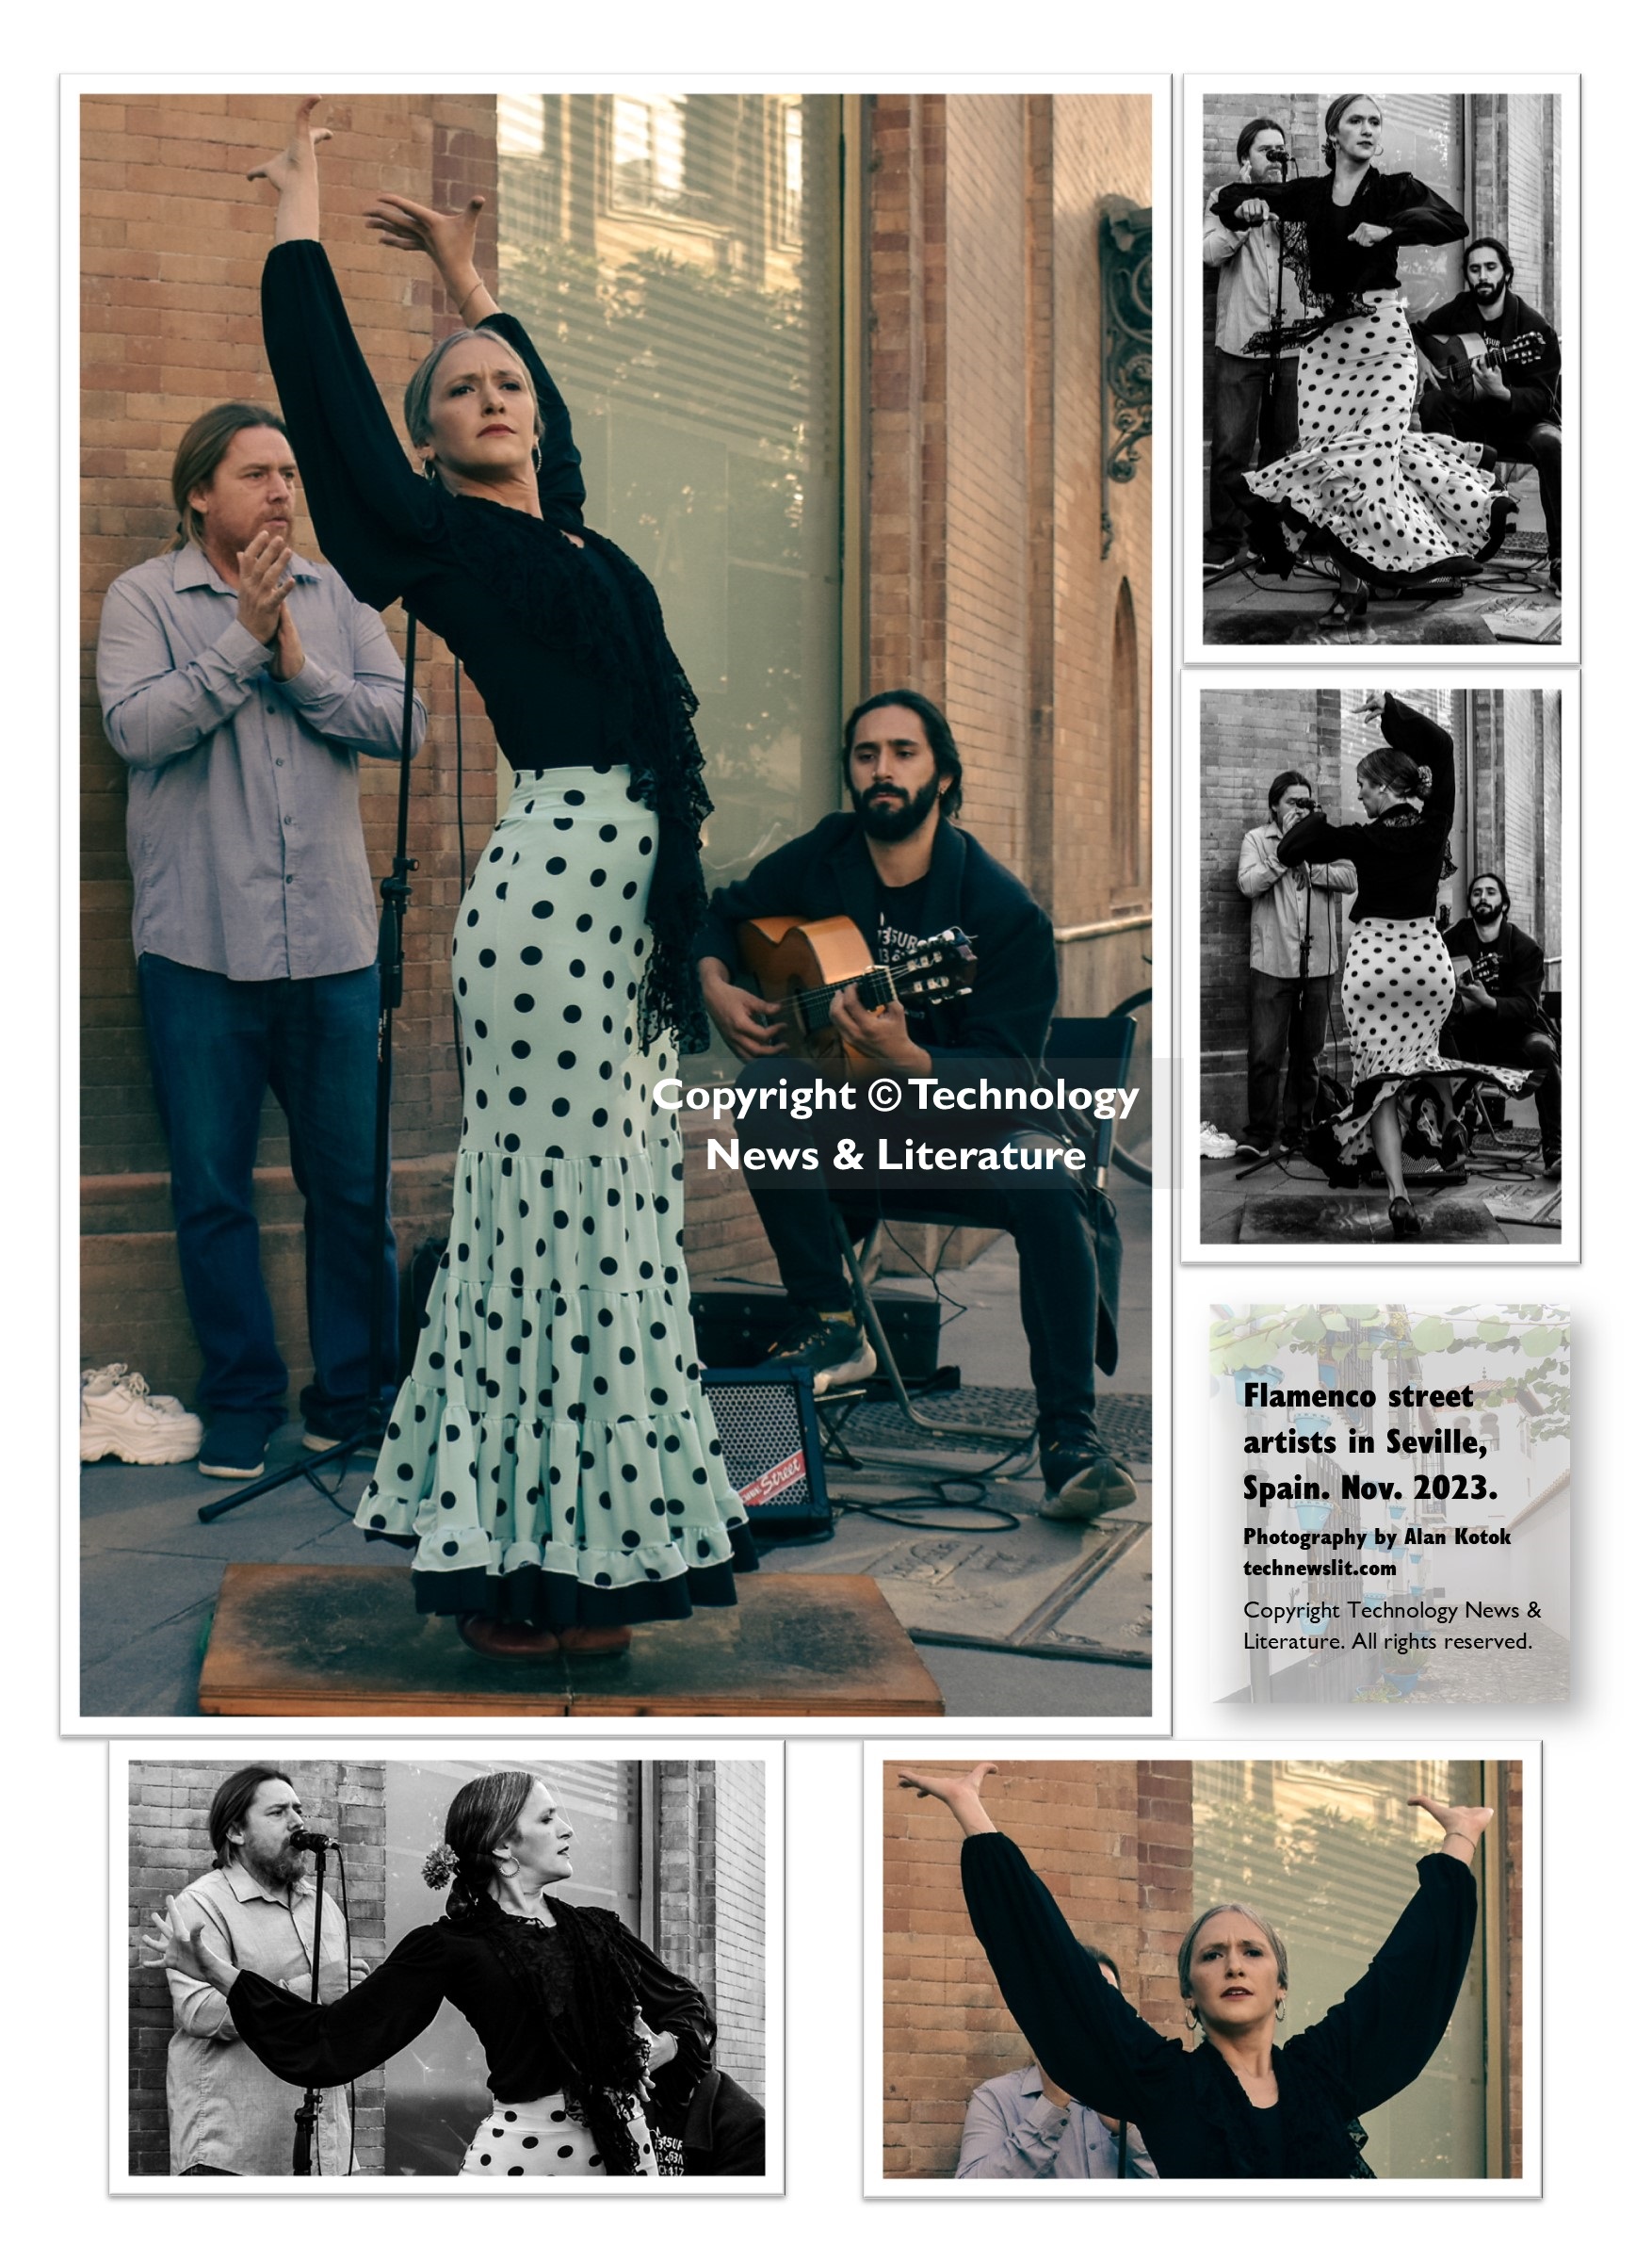 Flamenco poster with watermark